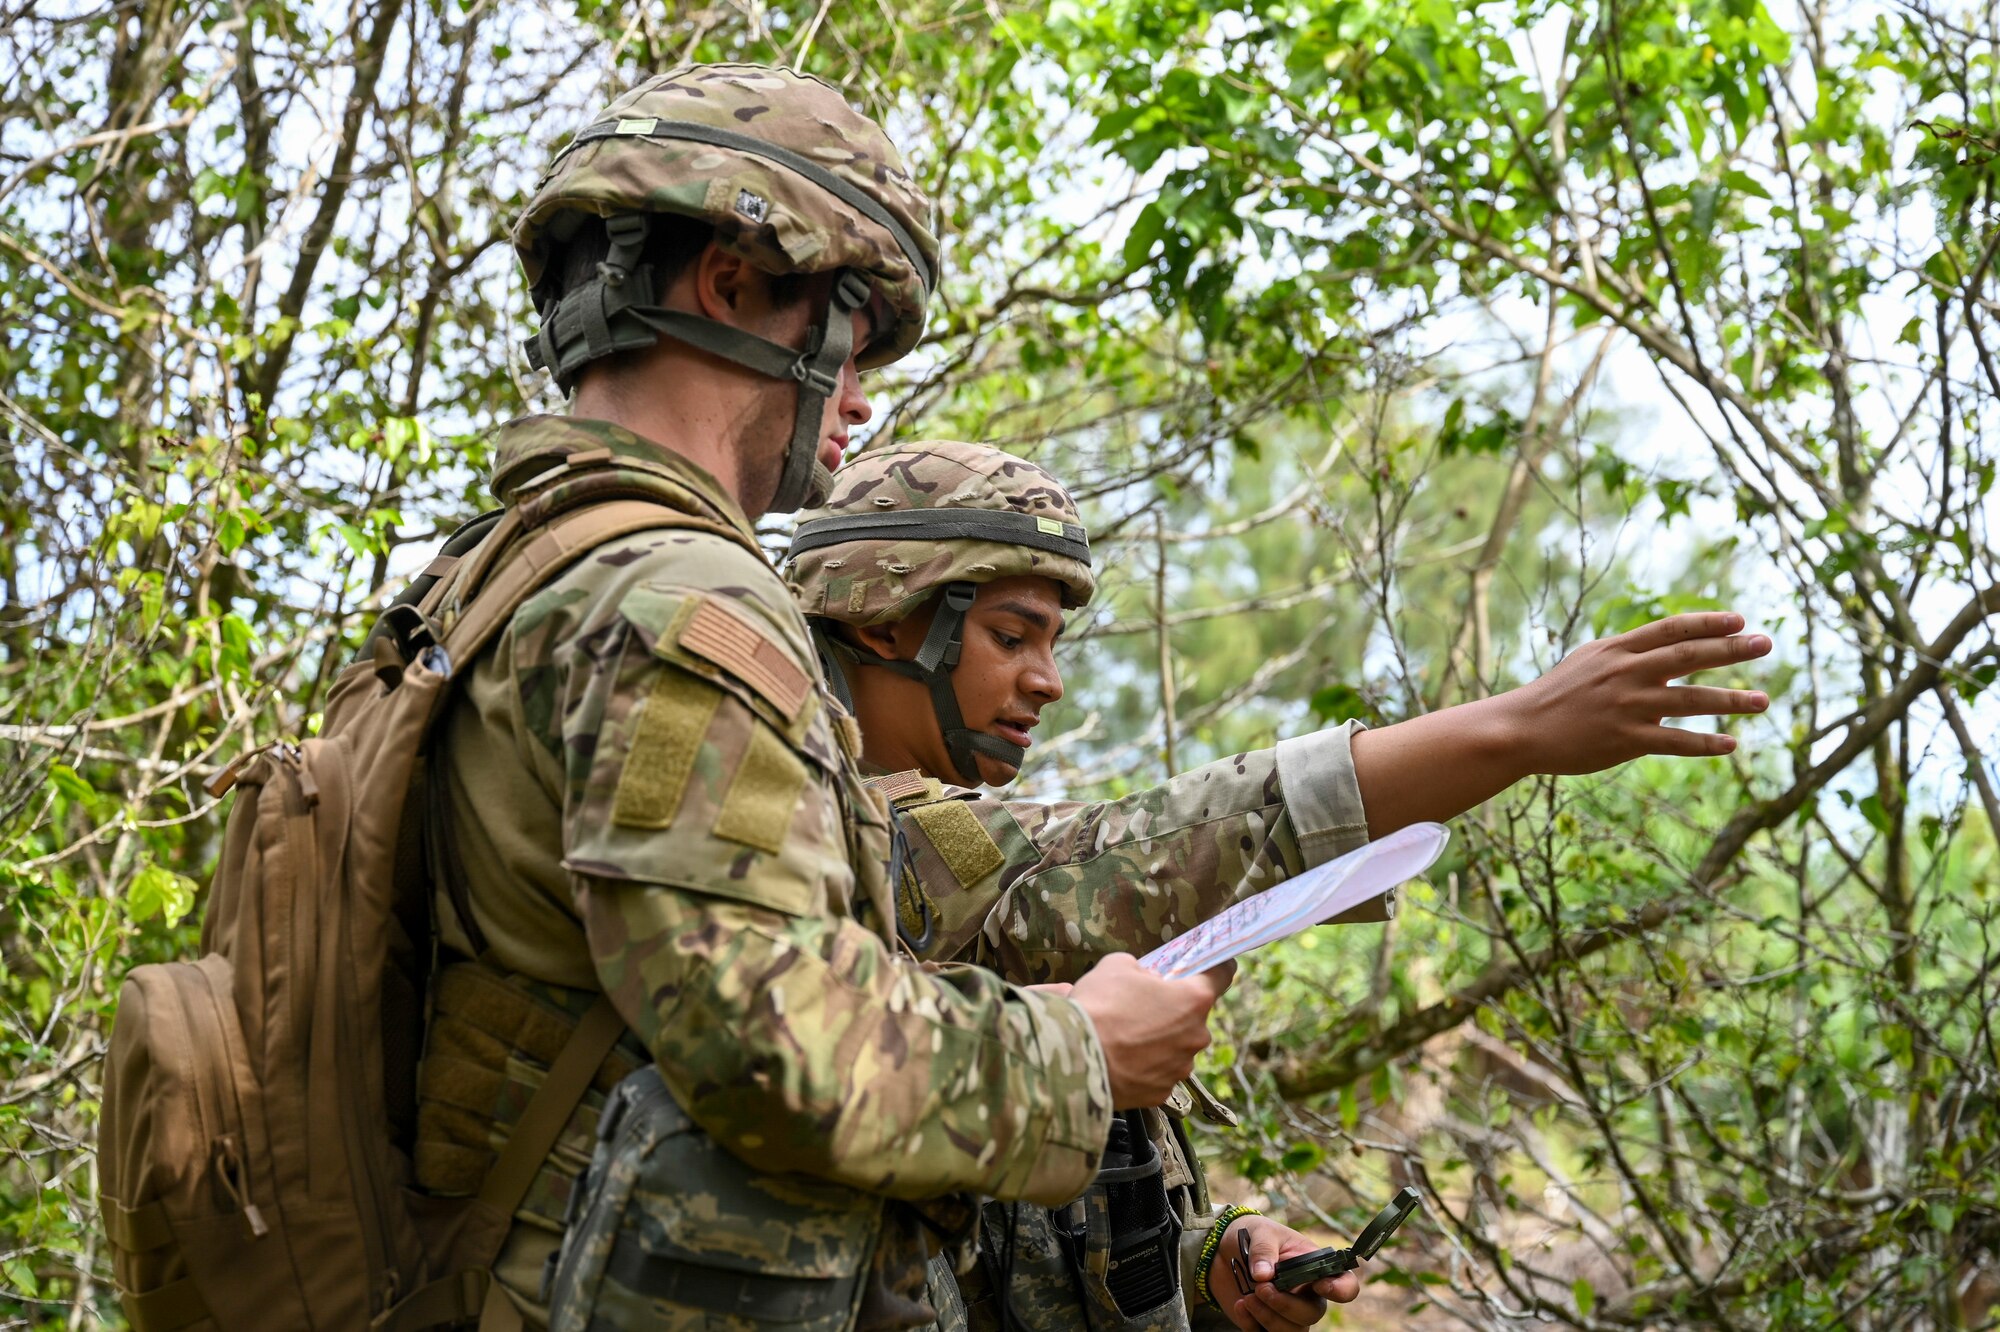 U.S. Air Force Airman 1st Class Adam Lixey and Airman 1st Class Brayan Rivera, systems technicians assigned to the 644th Combat Communications Squadron, practice their land navigation skills during exercise Dragon Forge on North West Field, Guam, April 13, 2021. Exercise Dragon Forge is a combat skills training course that prepares participants to deploy to austere locations. (U.S. Air Force photo by Tech. Sgt. Esteban Esquivel)